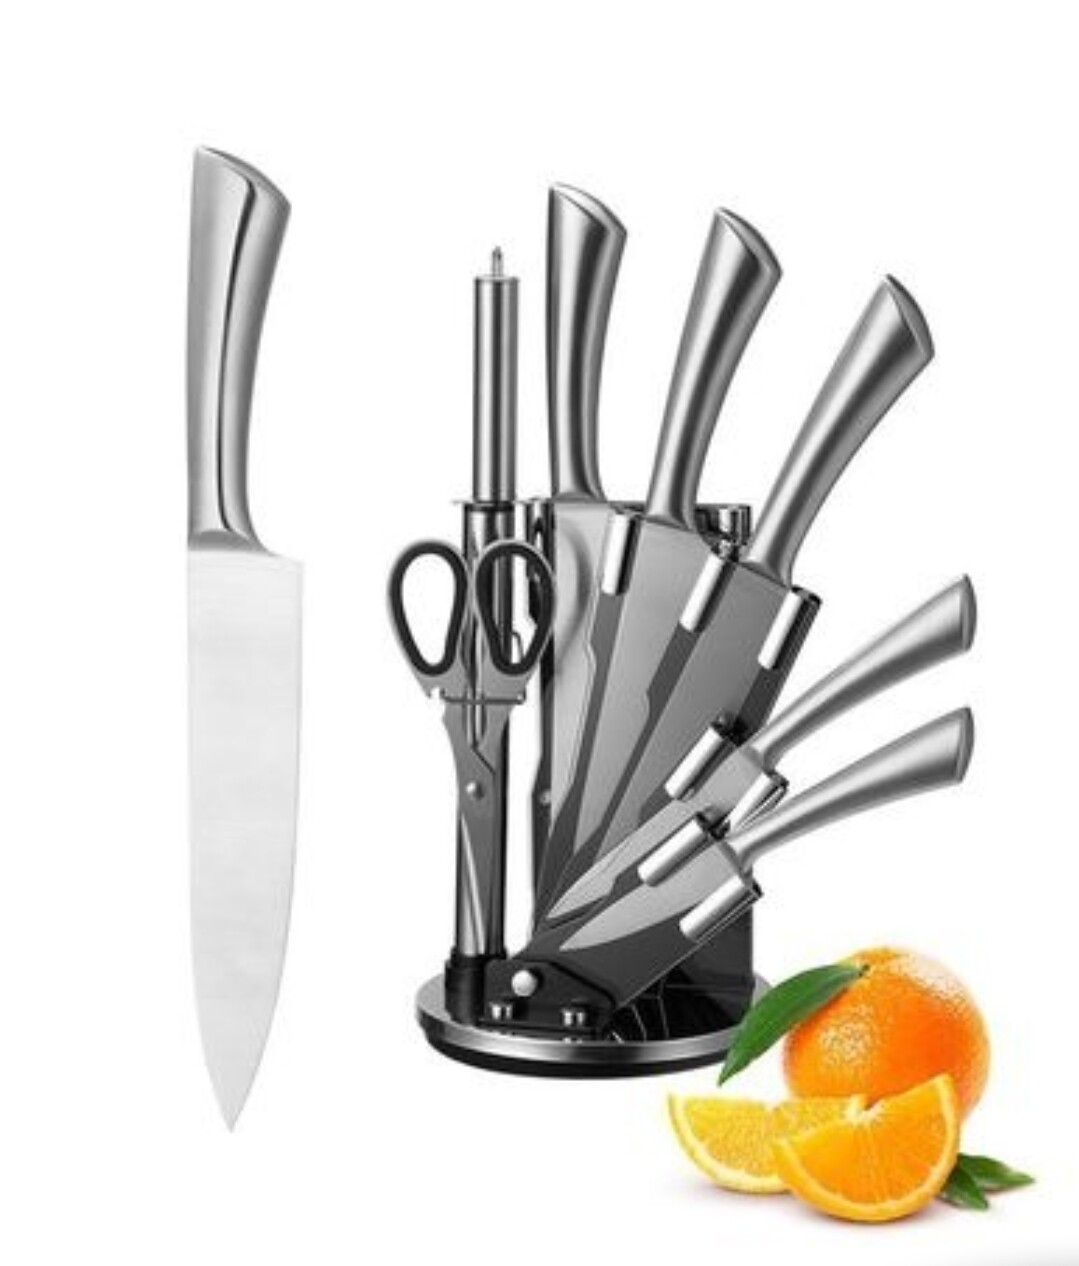 Forging Family 9pcs Chef's Knife Set with Rotating Holder - 8-Piece Stainless Steel Cutlery Ensemble with Acrylic Stand